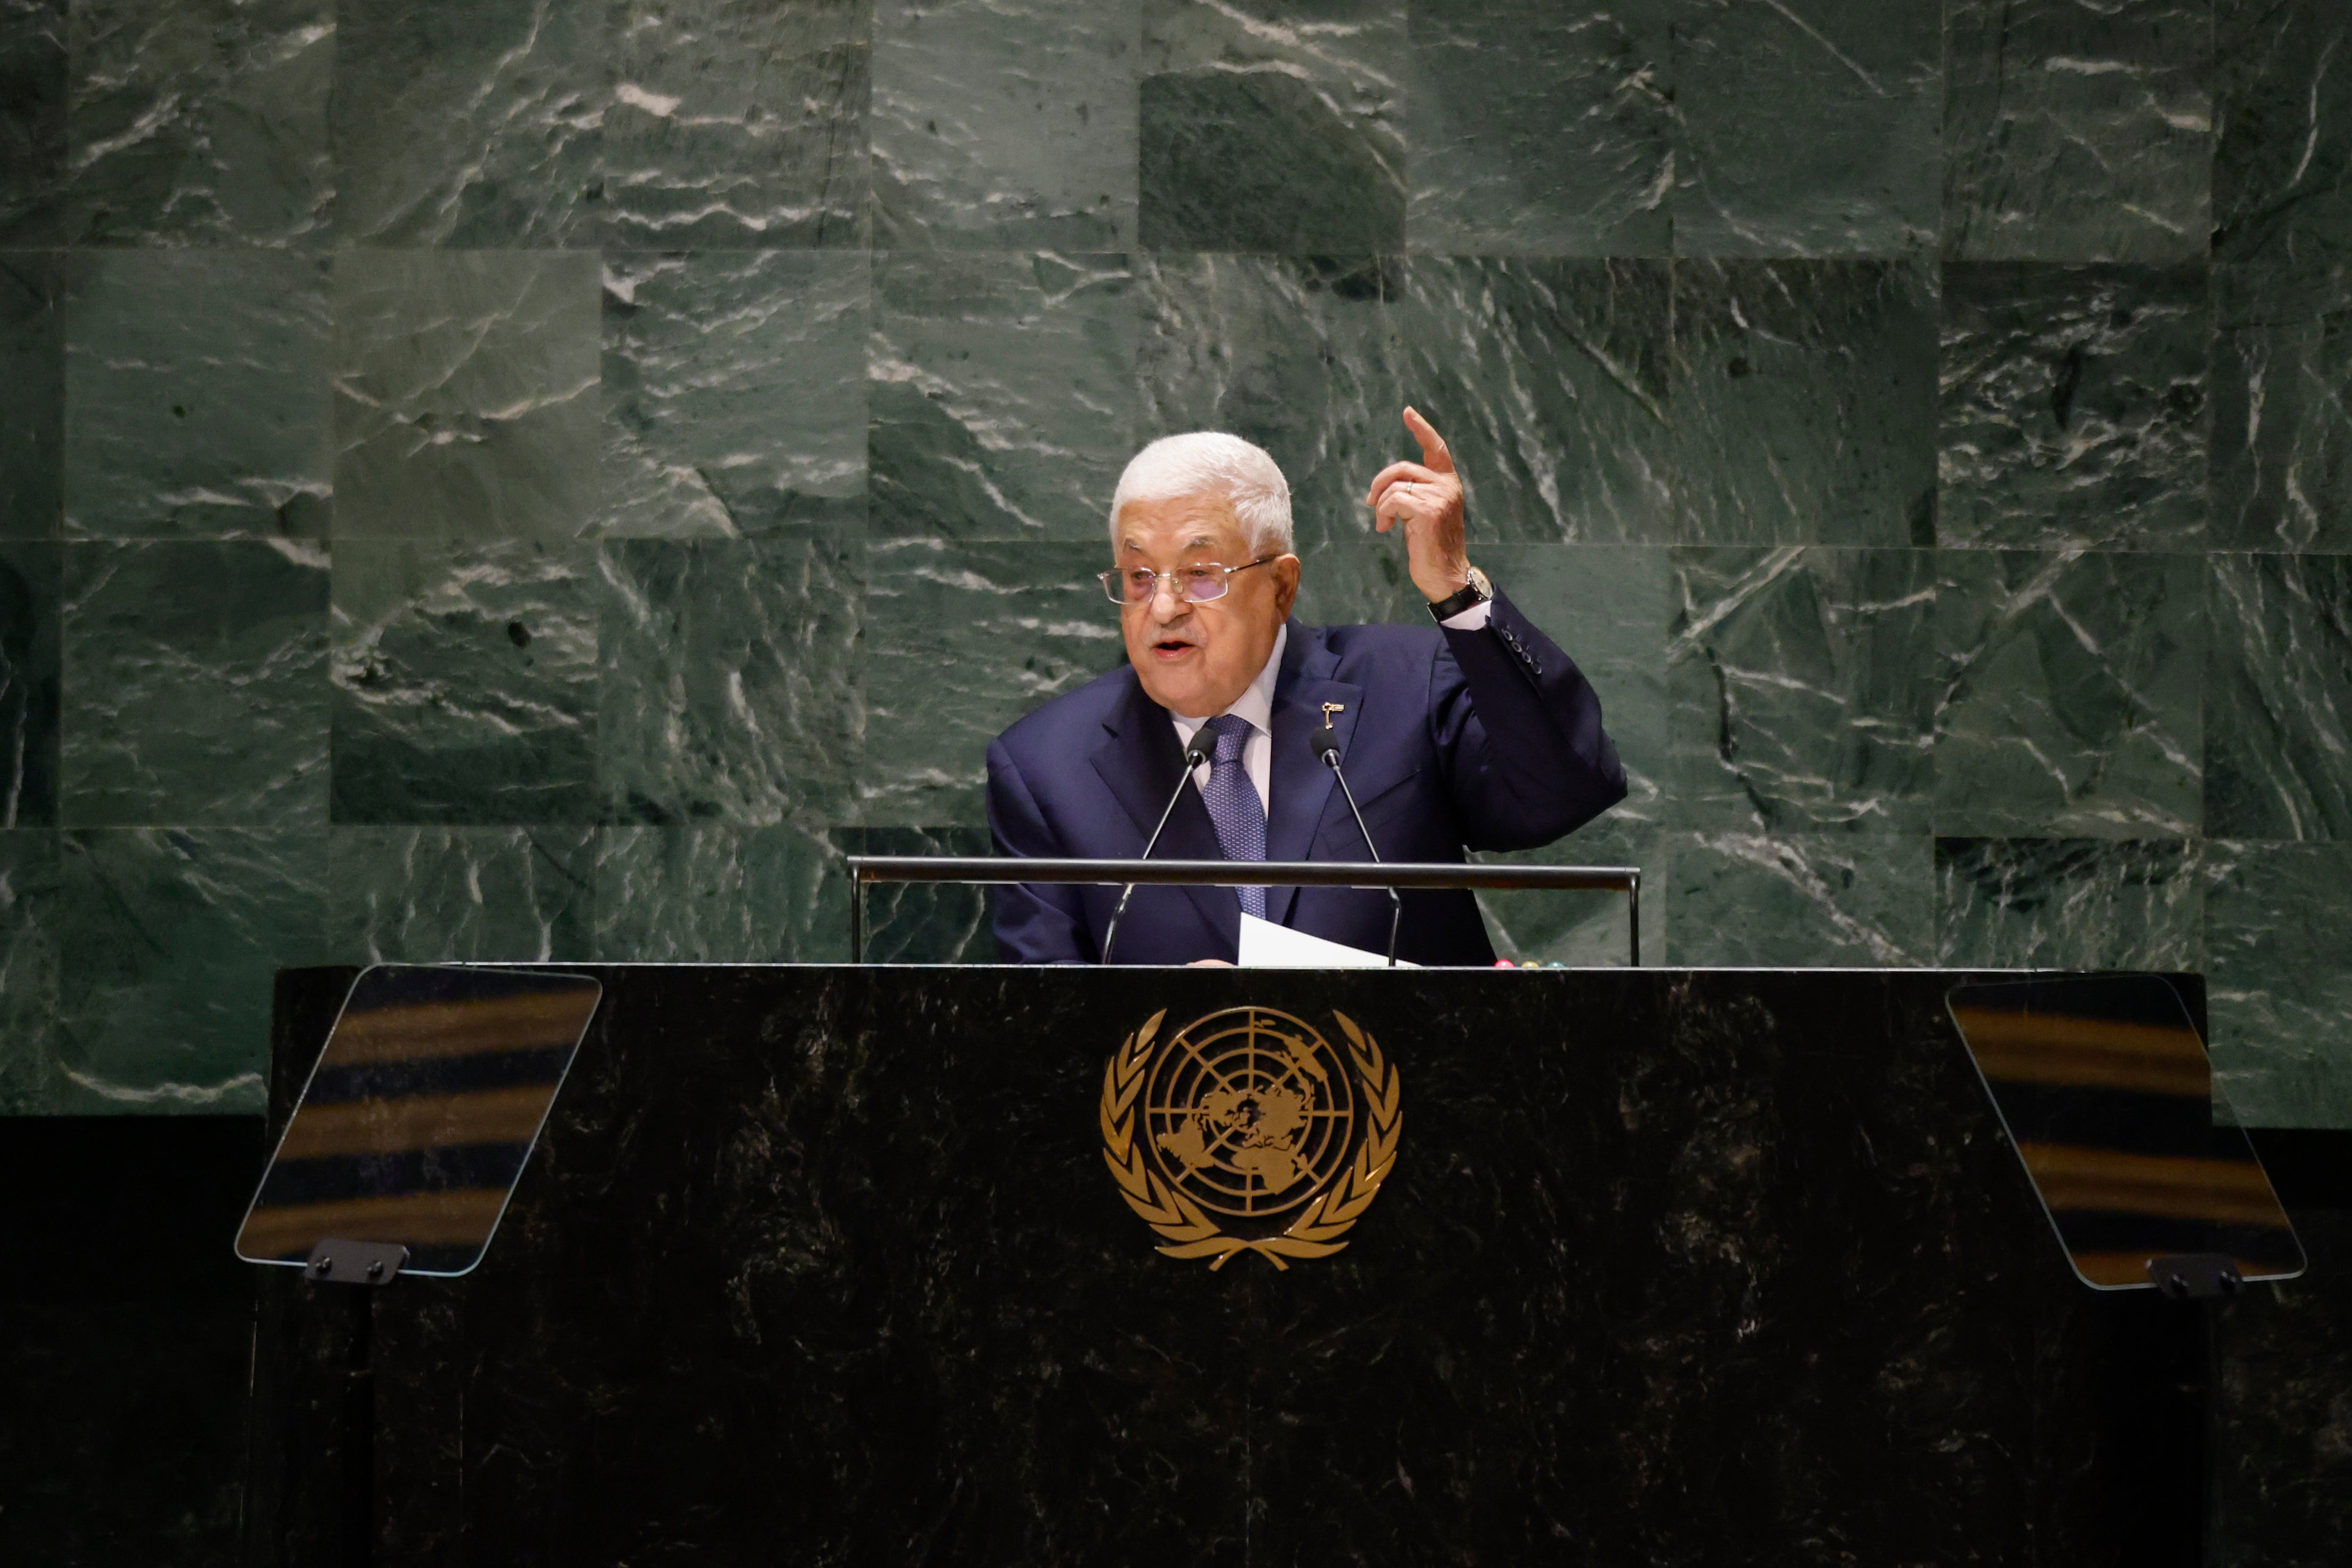 When Abbas won the Palestinian Authority presidency in 2005, he was viewed by many as the reformer who would lift the movement out of its doldrums